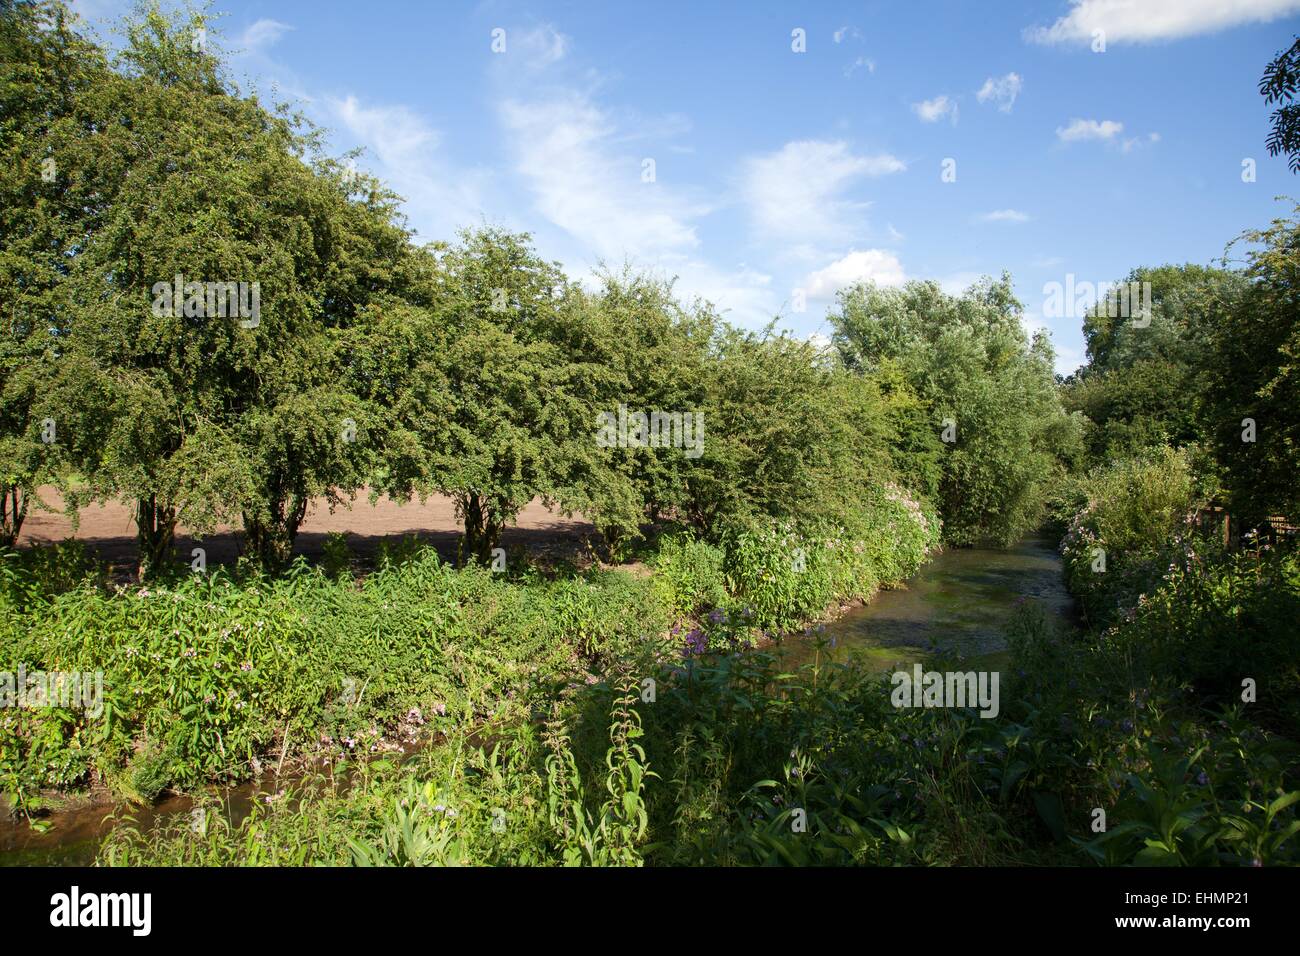 The River Stour, flowing behind the High Street In Kinver, Stock Photo